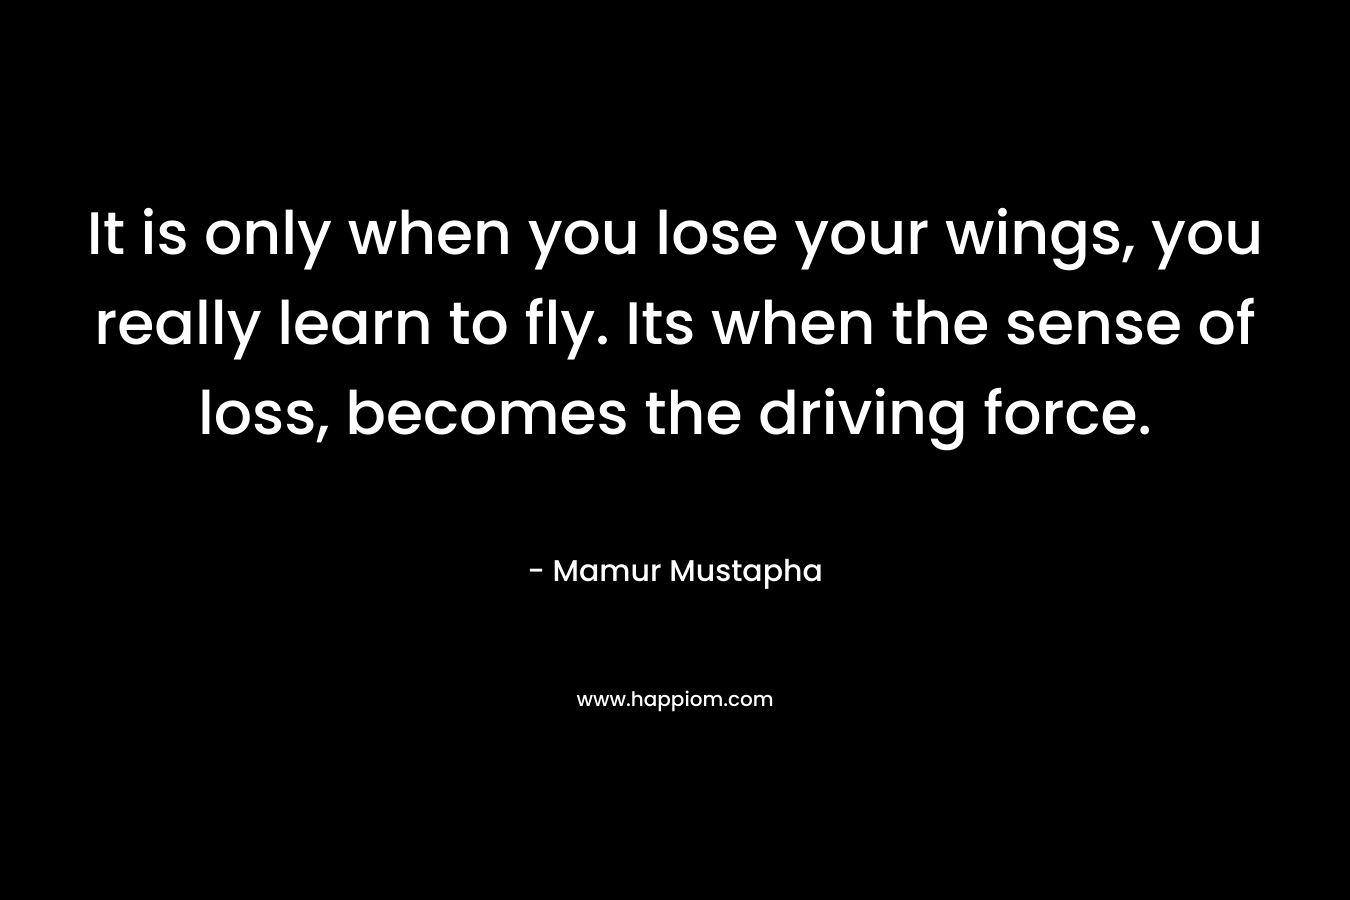 It is only when you lose your wings, you really learn to fly. Its when the sense of loss, becomes the driving force.